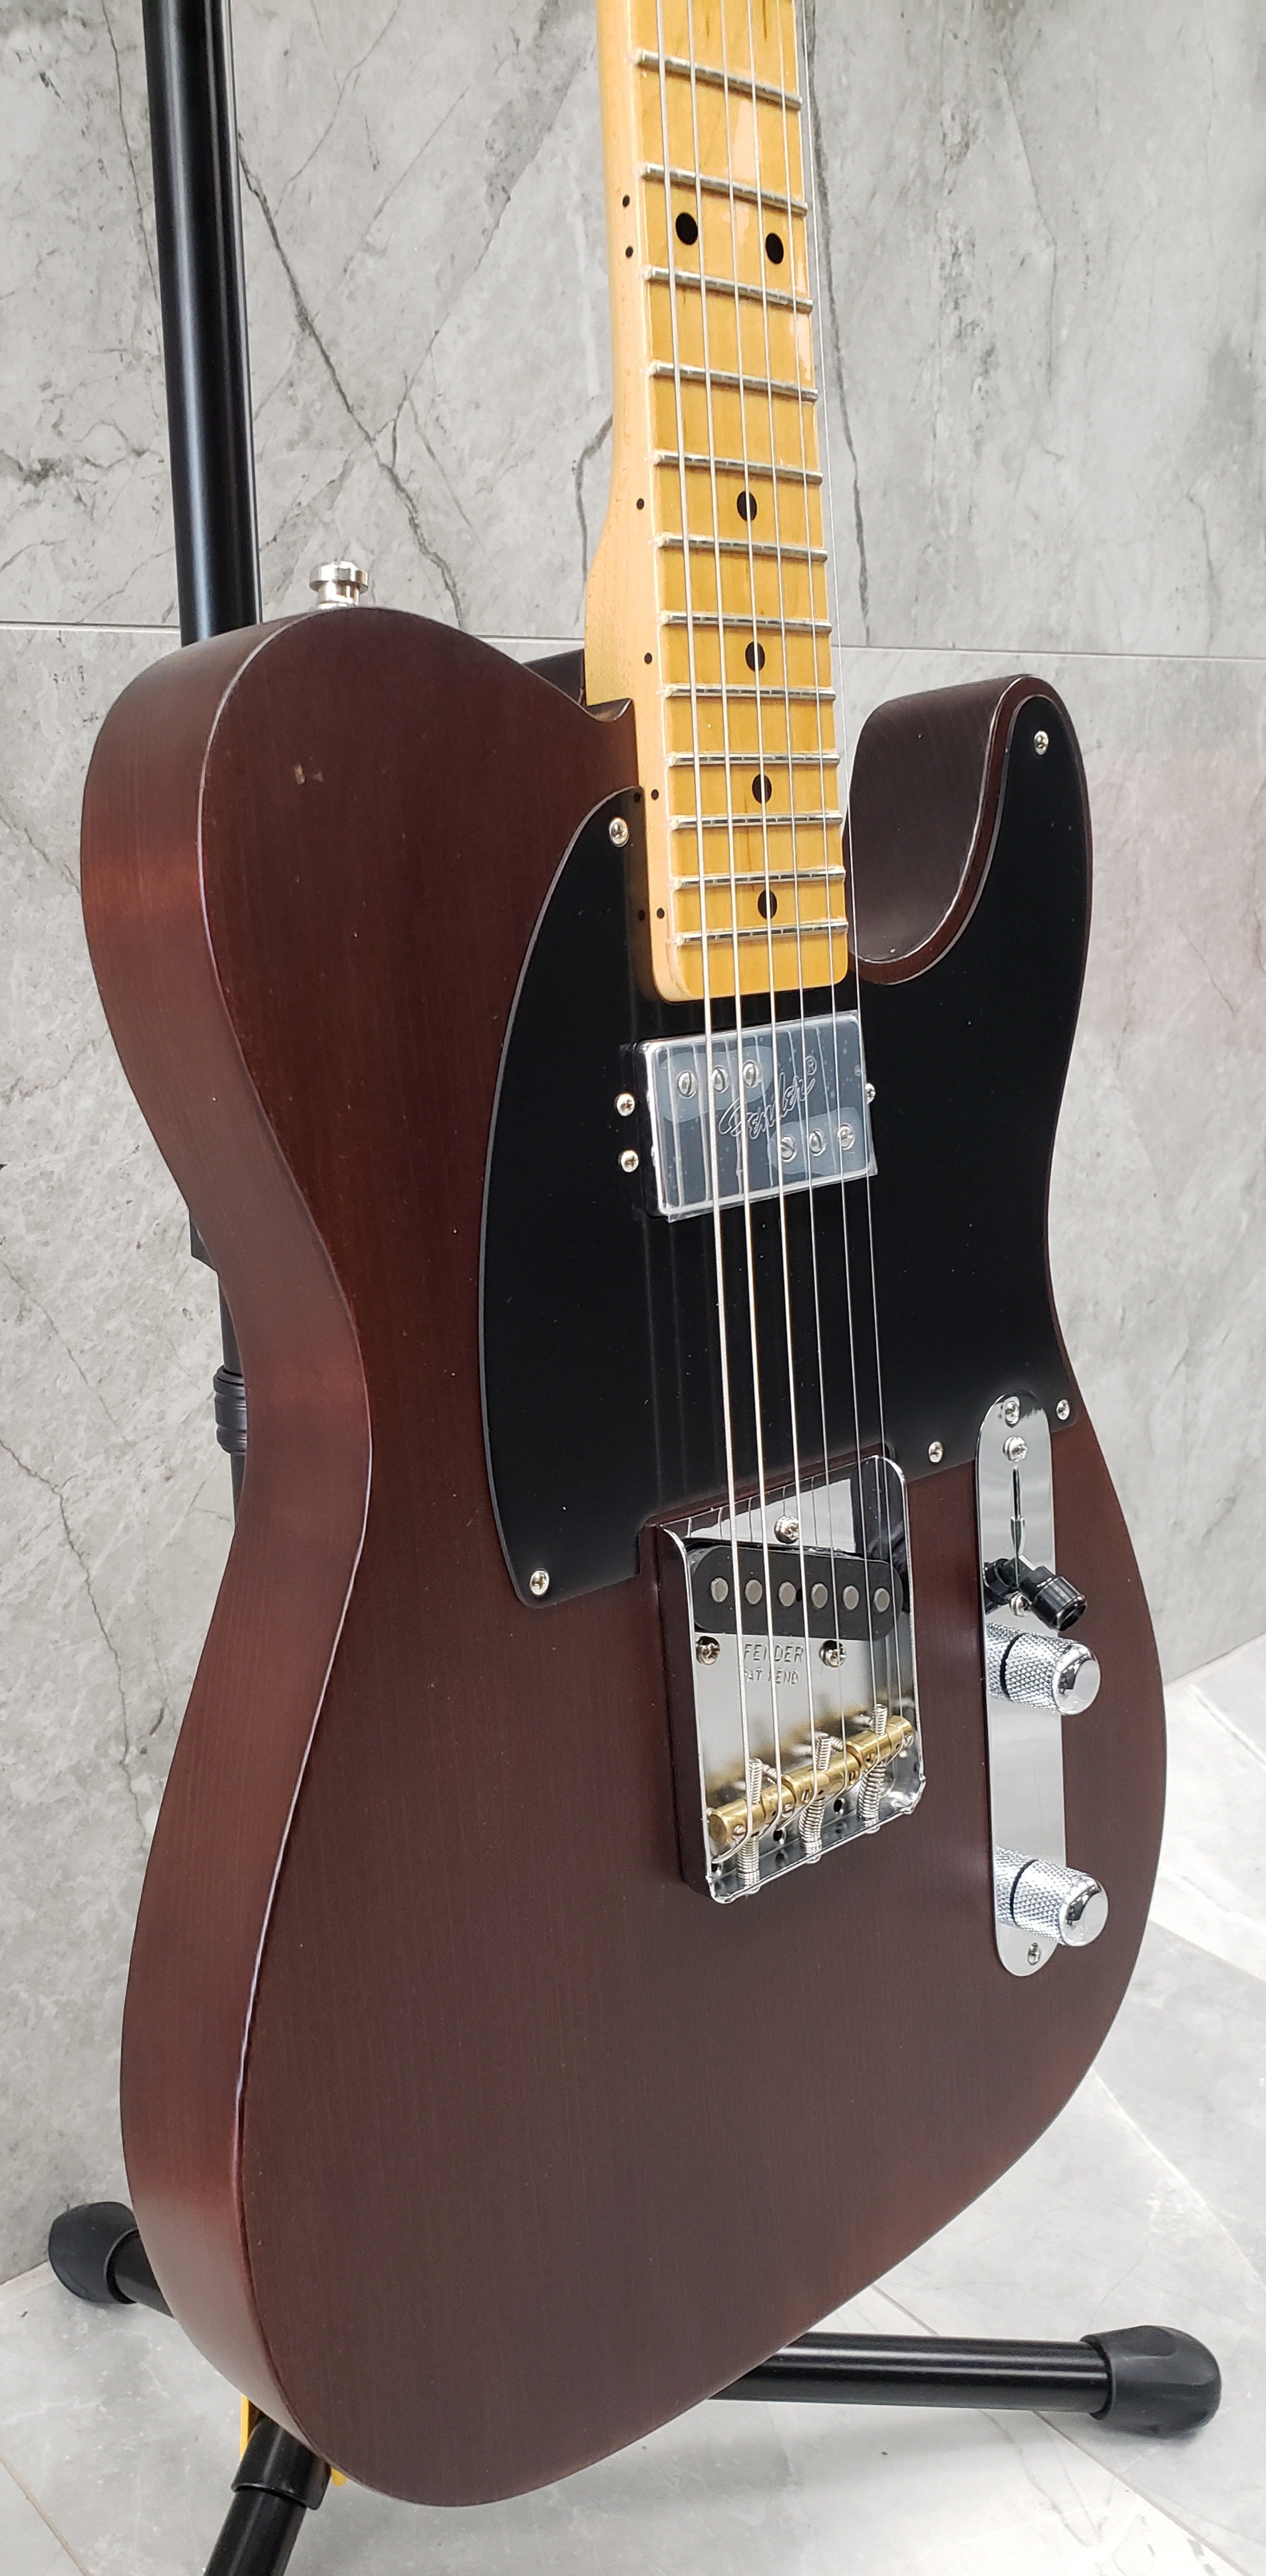 Fender Limited Edition American Vintage Hot Rod 50s Tele Reclaimed Redwood Maple Fingerboard, Natural 171508721 SERIAL NUMBER LE03122 - 5.8 LBS